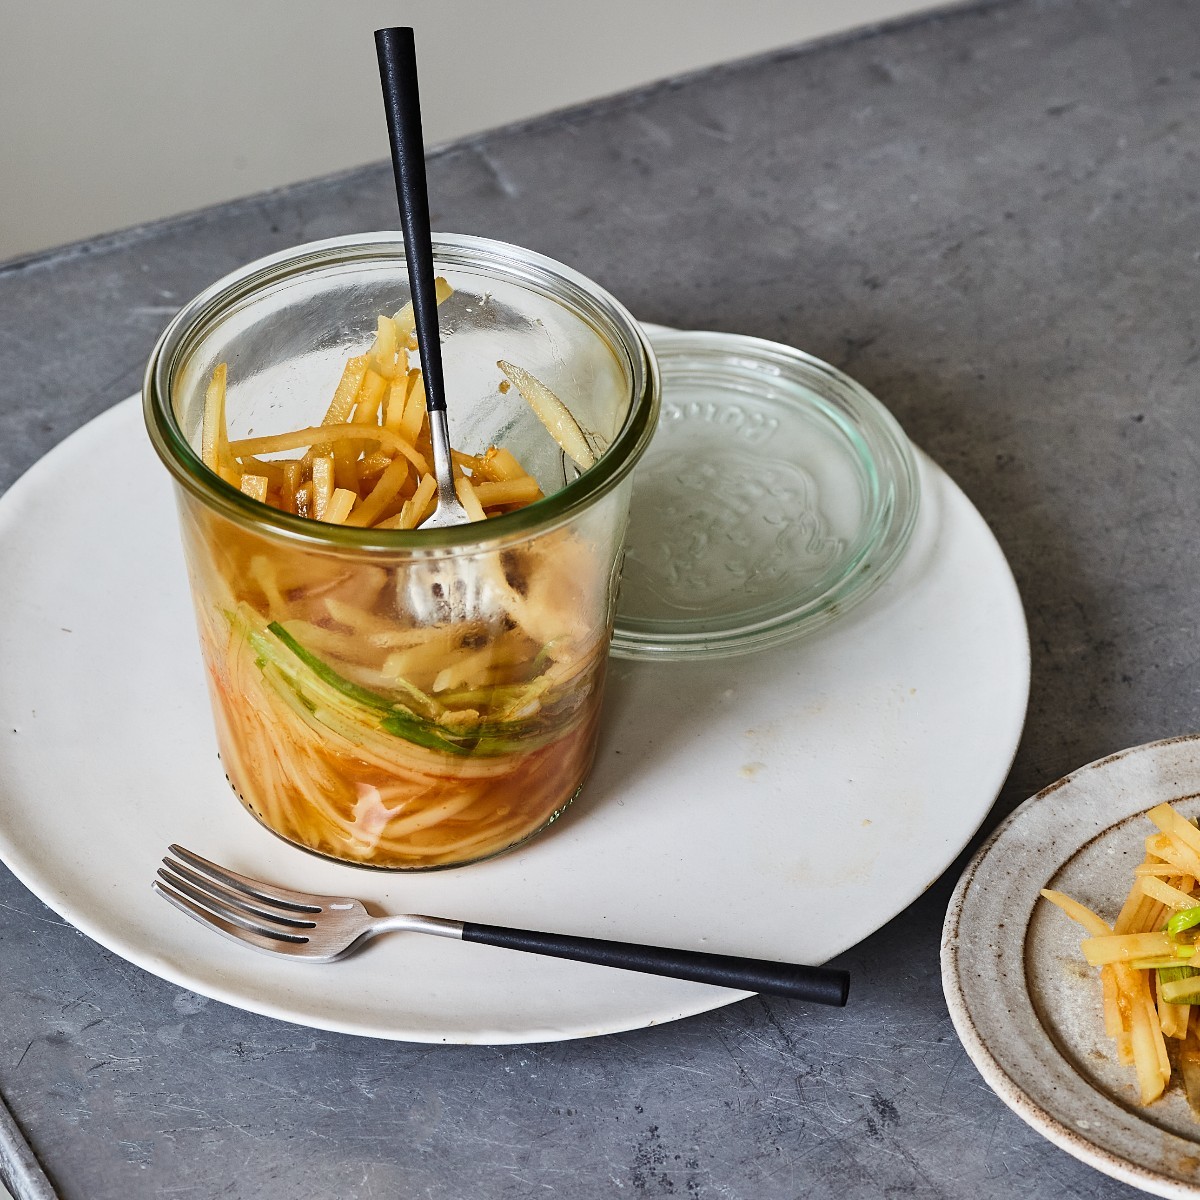 Celebrate #FoodWasteActionWeek with a waste-saving recipe from @chefjeremypang, @schoolofwok founder and @planzheroes ambassador! Transform those surplus potatoes into a zesty treat and join the mission to minimise food waste. Get his recipe here ➡️ brnw.ch/21wI7yR